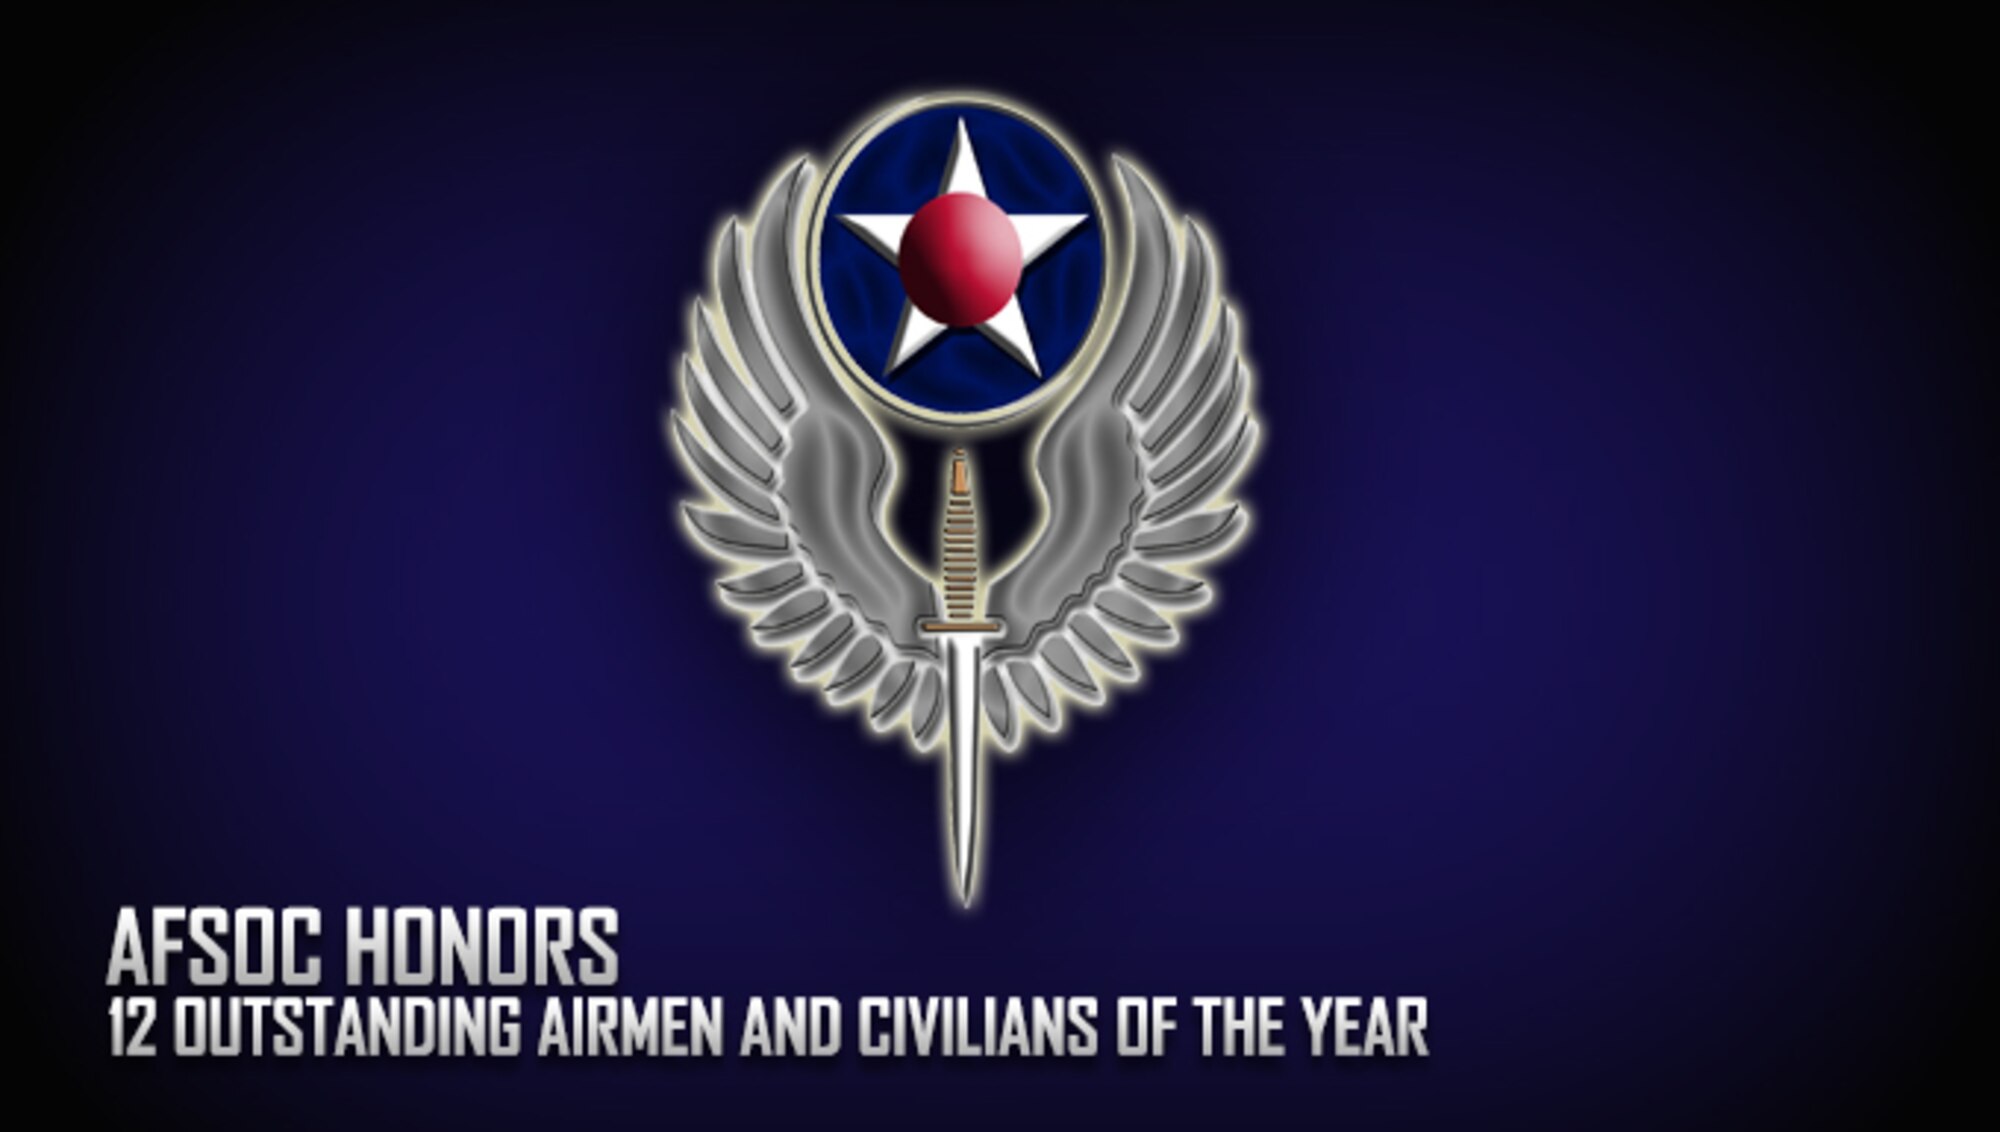 AFSOC honors 12 outstanding airmen and civilians of the year